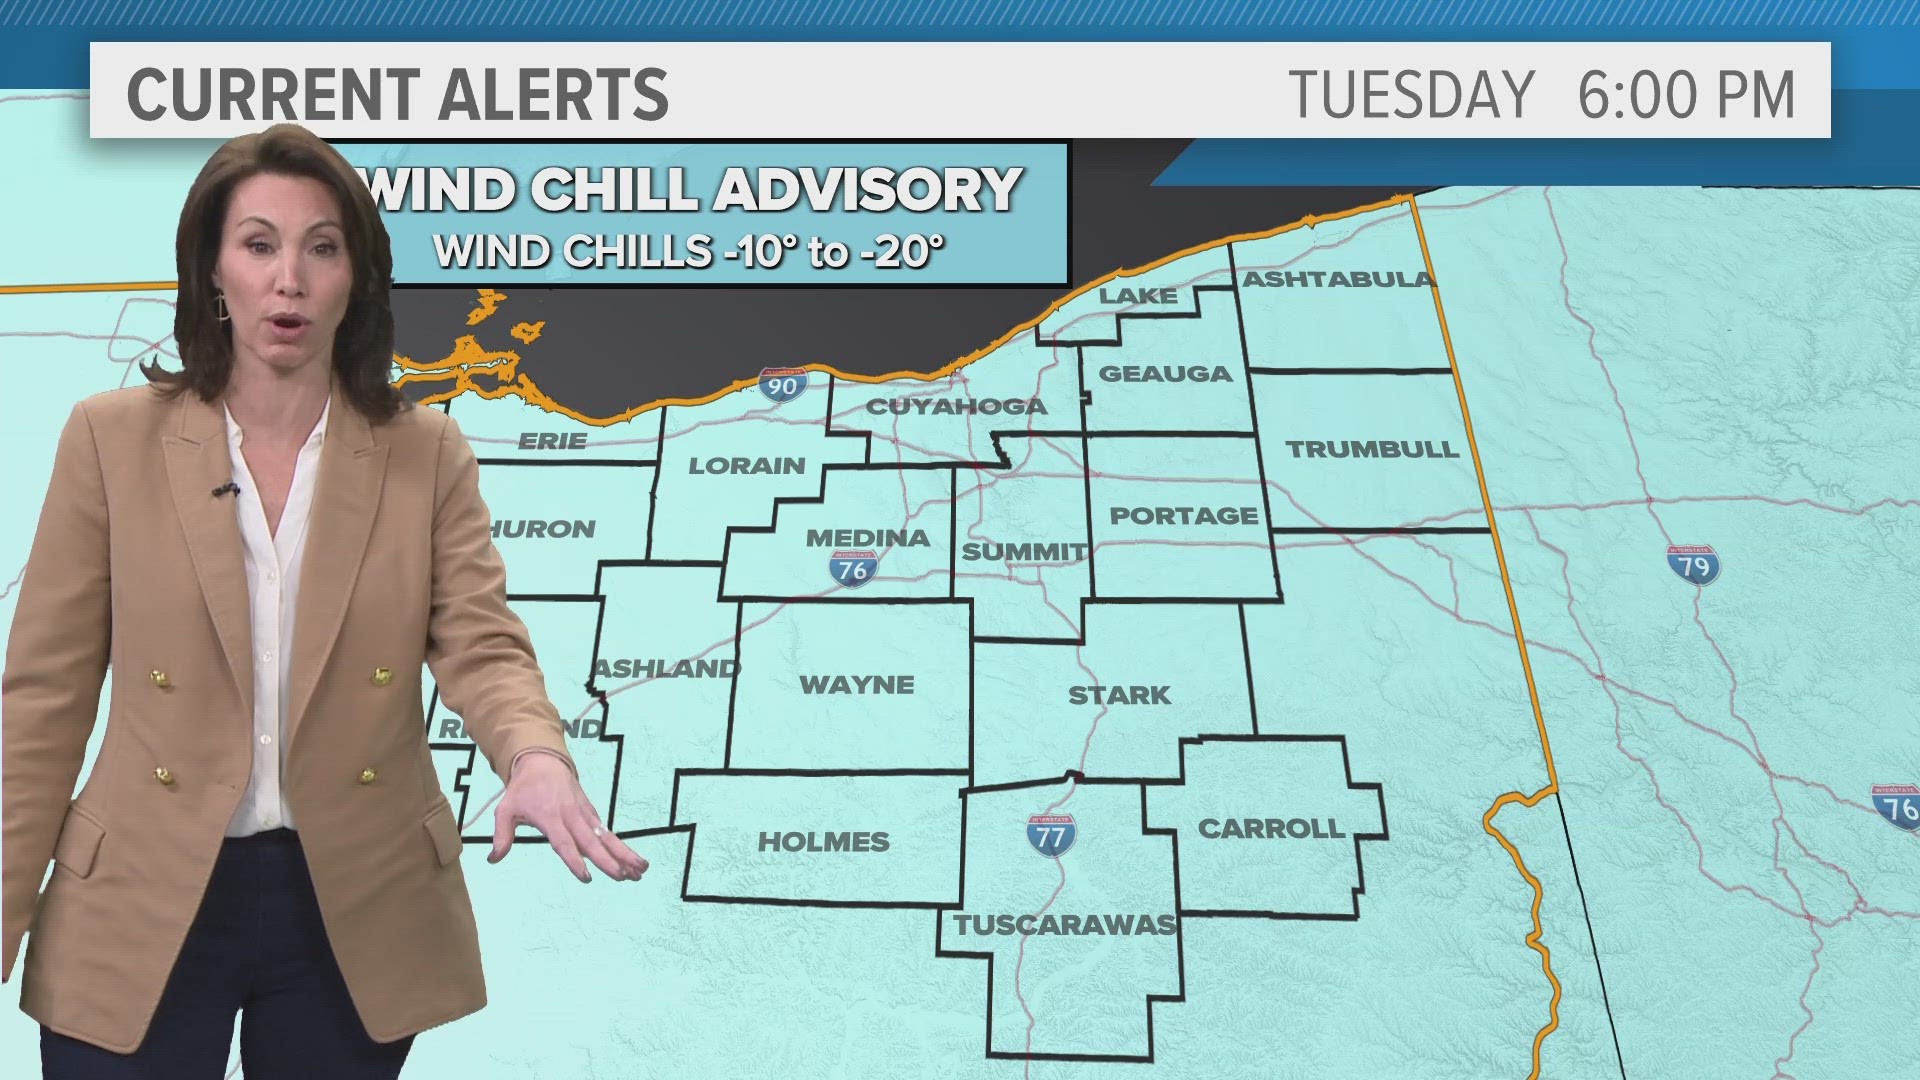 The cold weather has triggered weather alerts and school closures across the region.